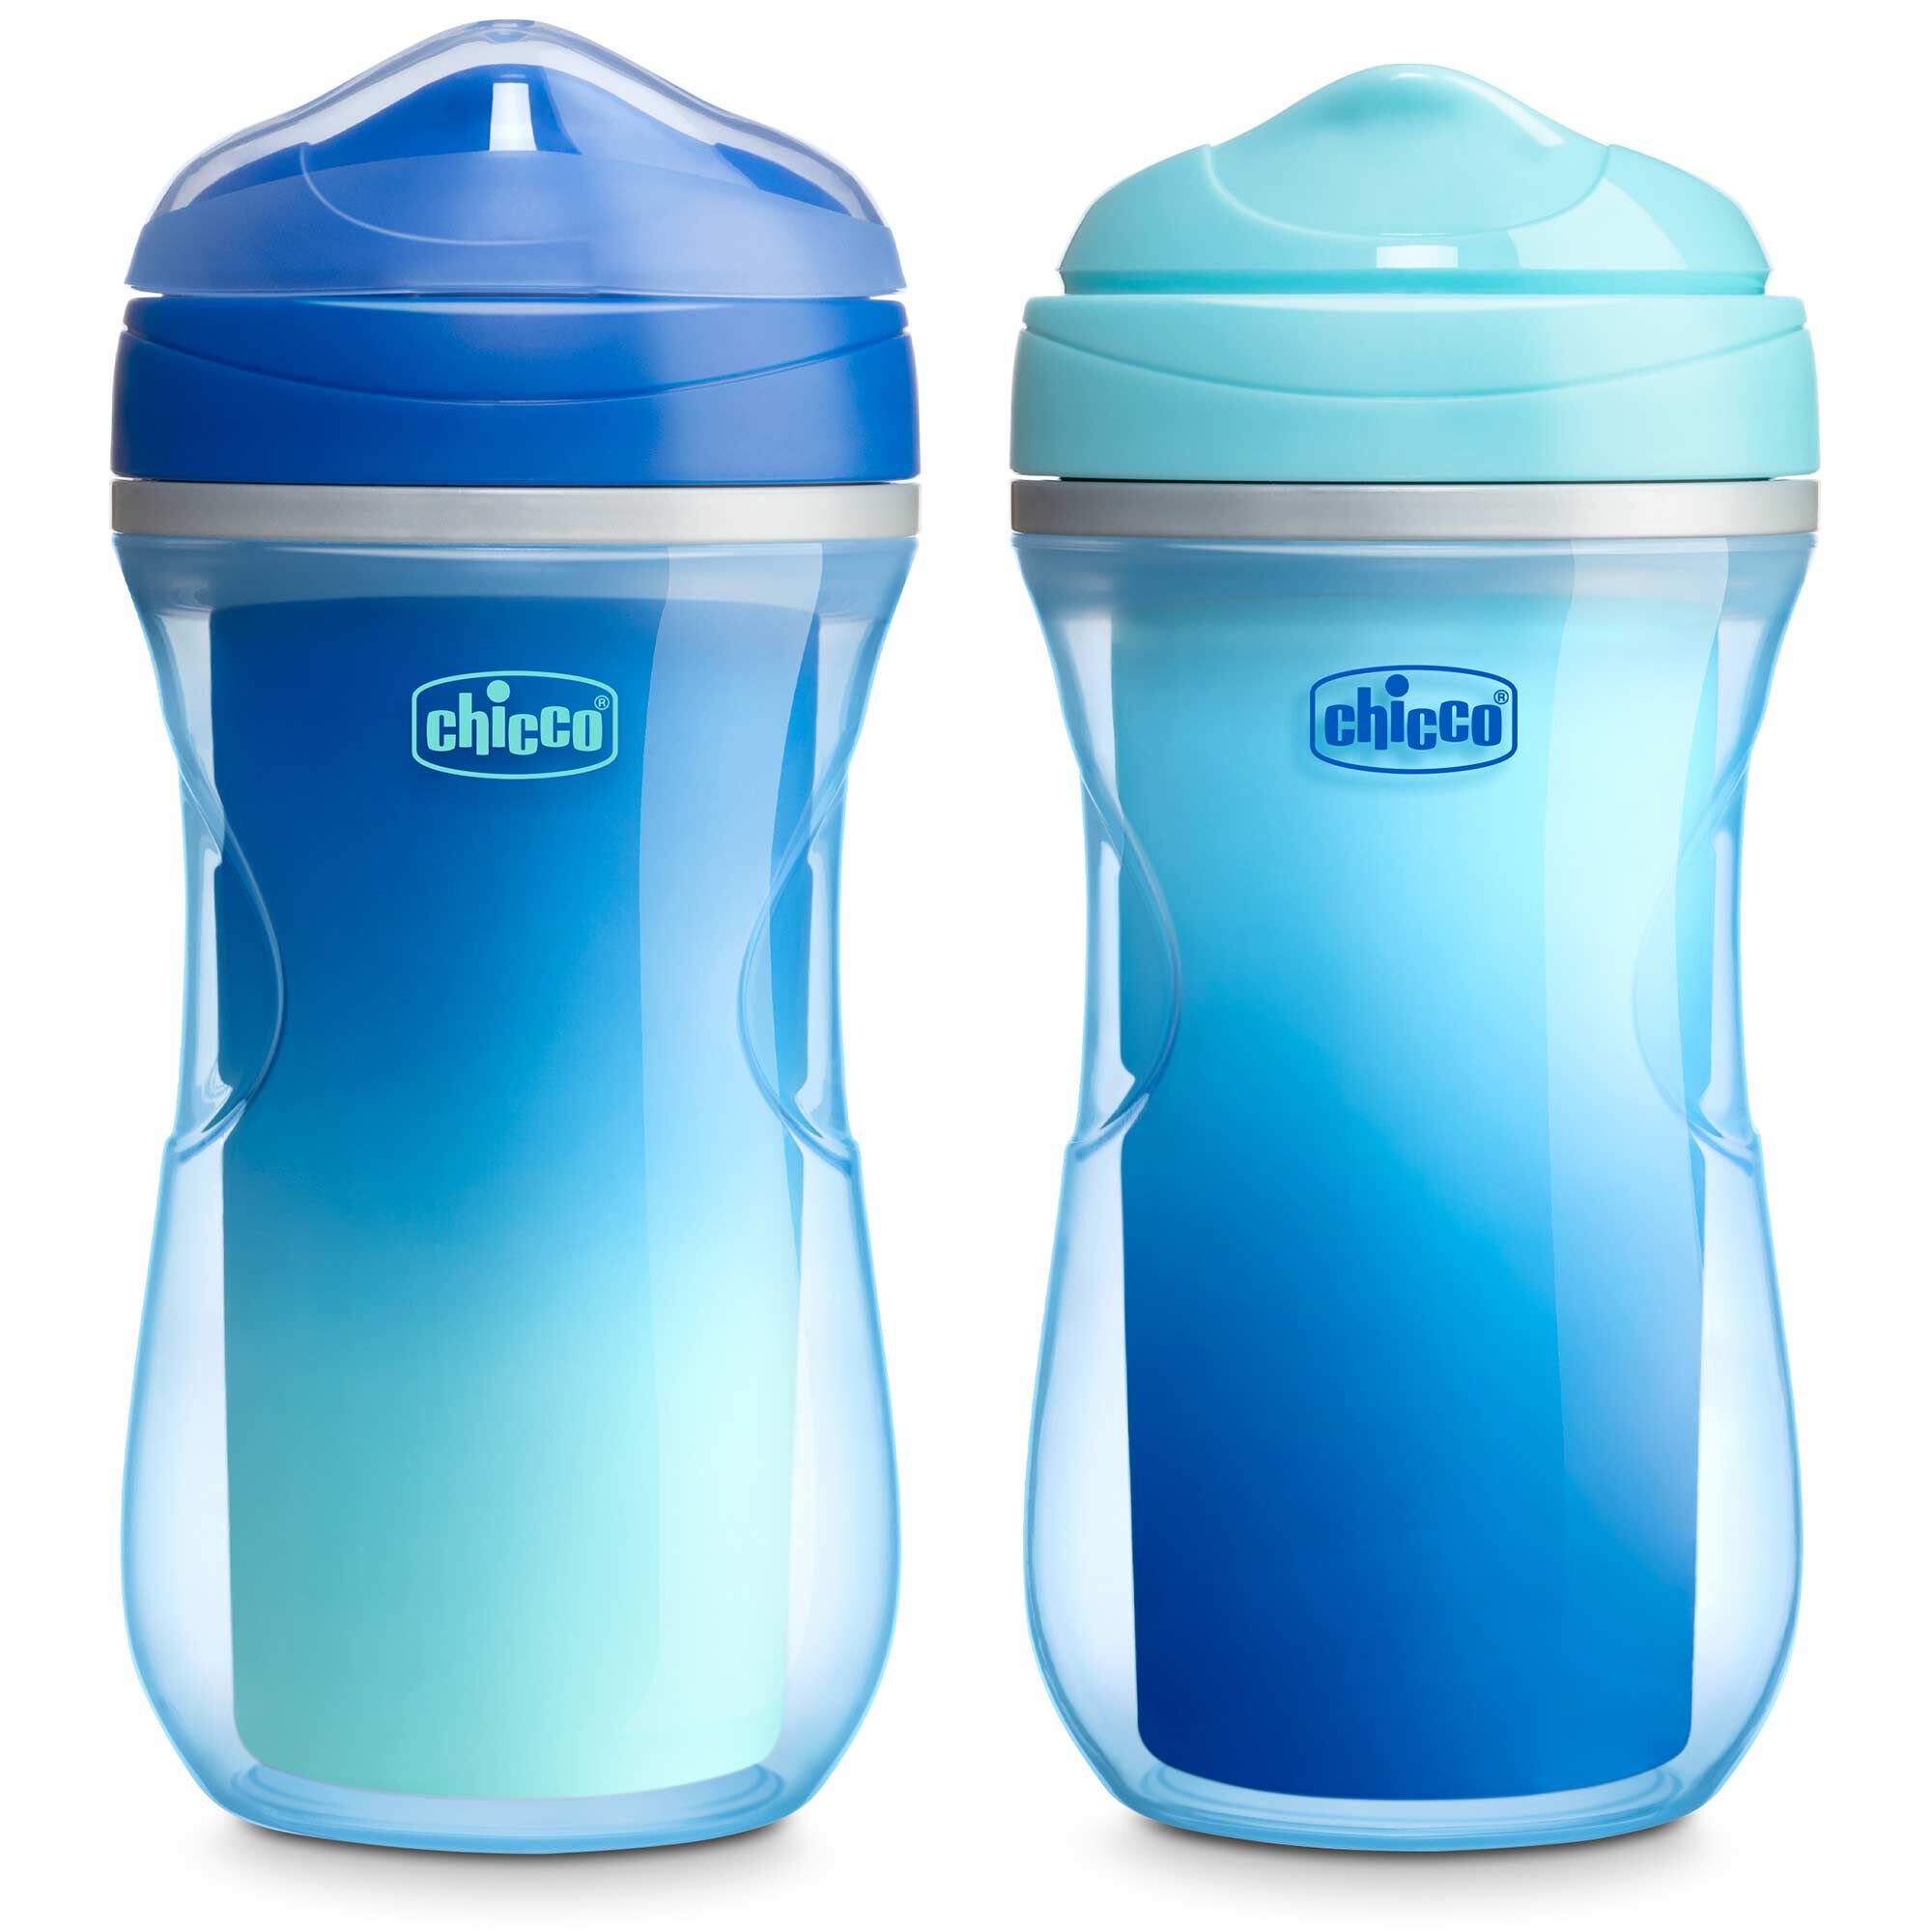 https://www.chiccousa.com/dw/image/v2/AAMT_PRD/on/demandware.static/-/Sites-chicco_catalog/default/dwa500b9c0/images/products/feeding/insulated-rim/chicco-insulated-rim-spout-trainer-blue-teal-ombre.jpg?sw=2000&sh=2000&sm=fit